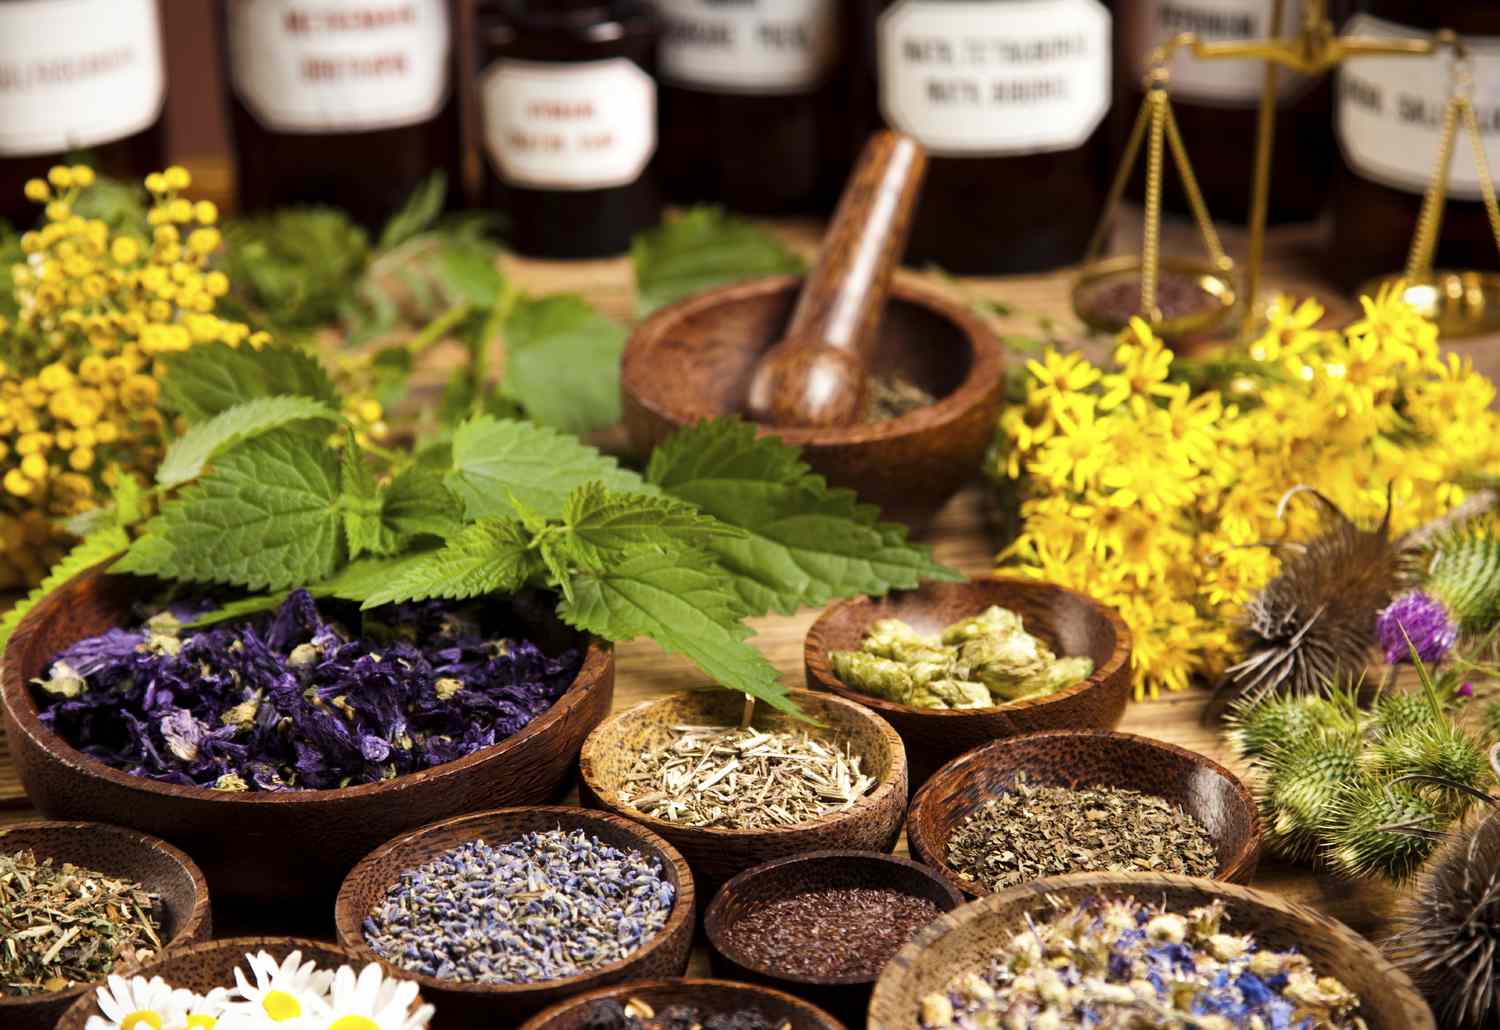 6 Common Homeopathy Medicines You Should Keep at Home